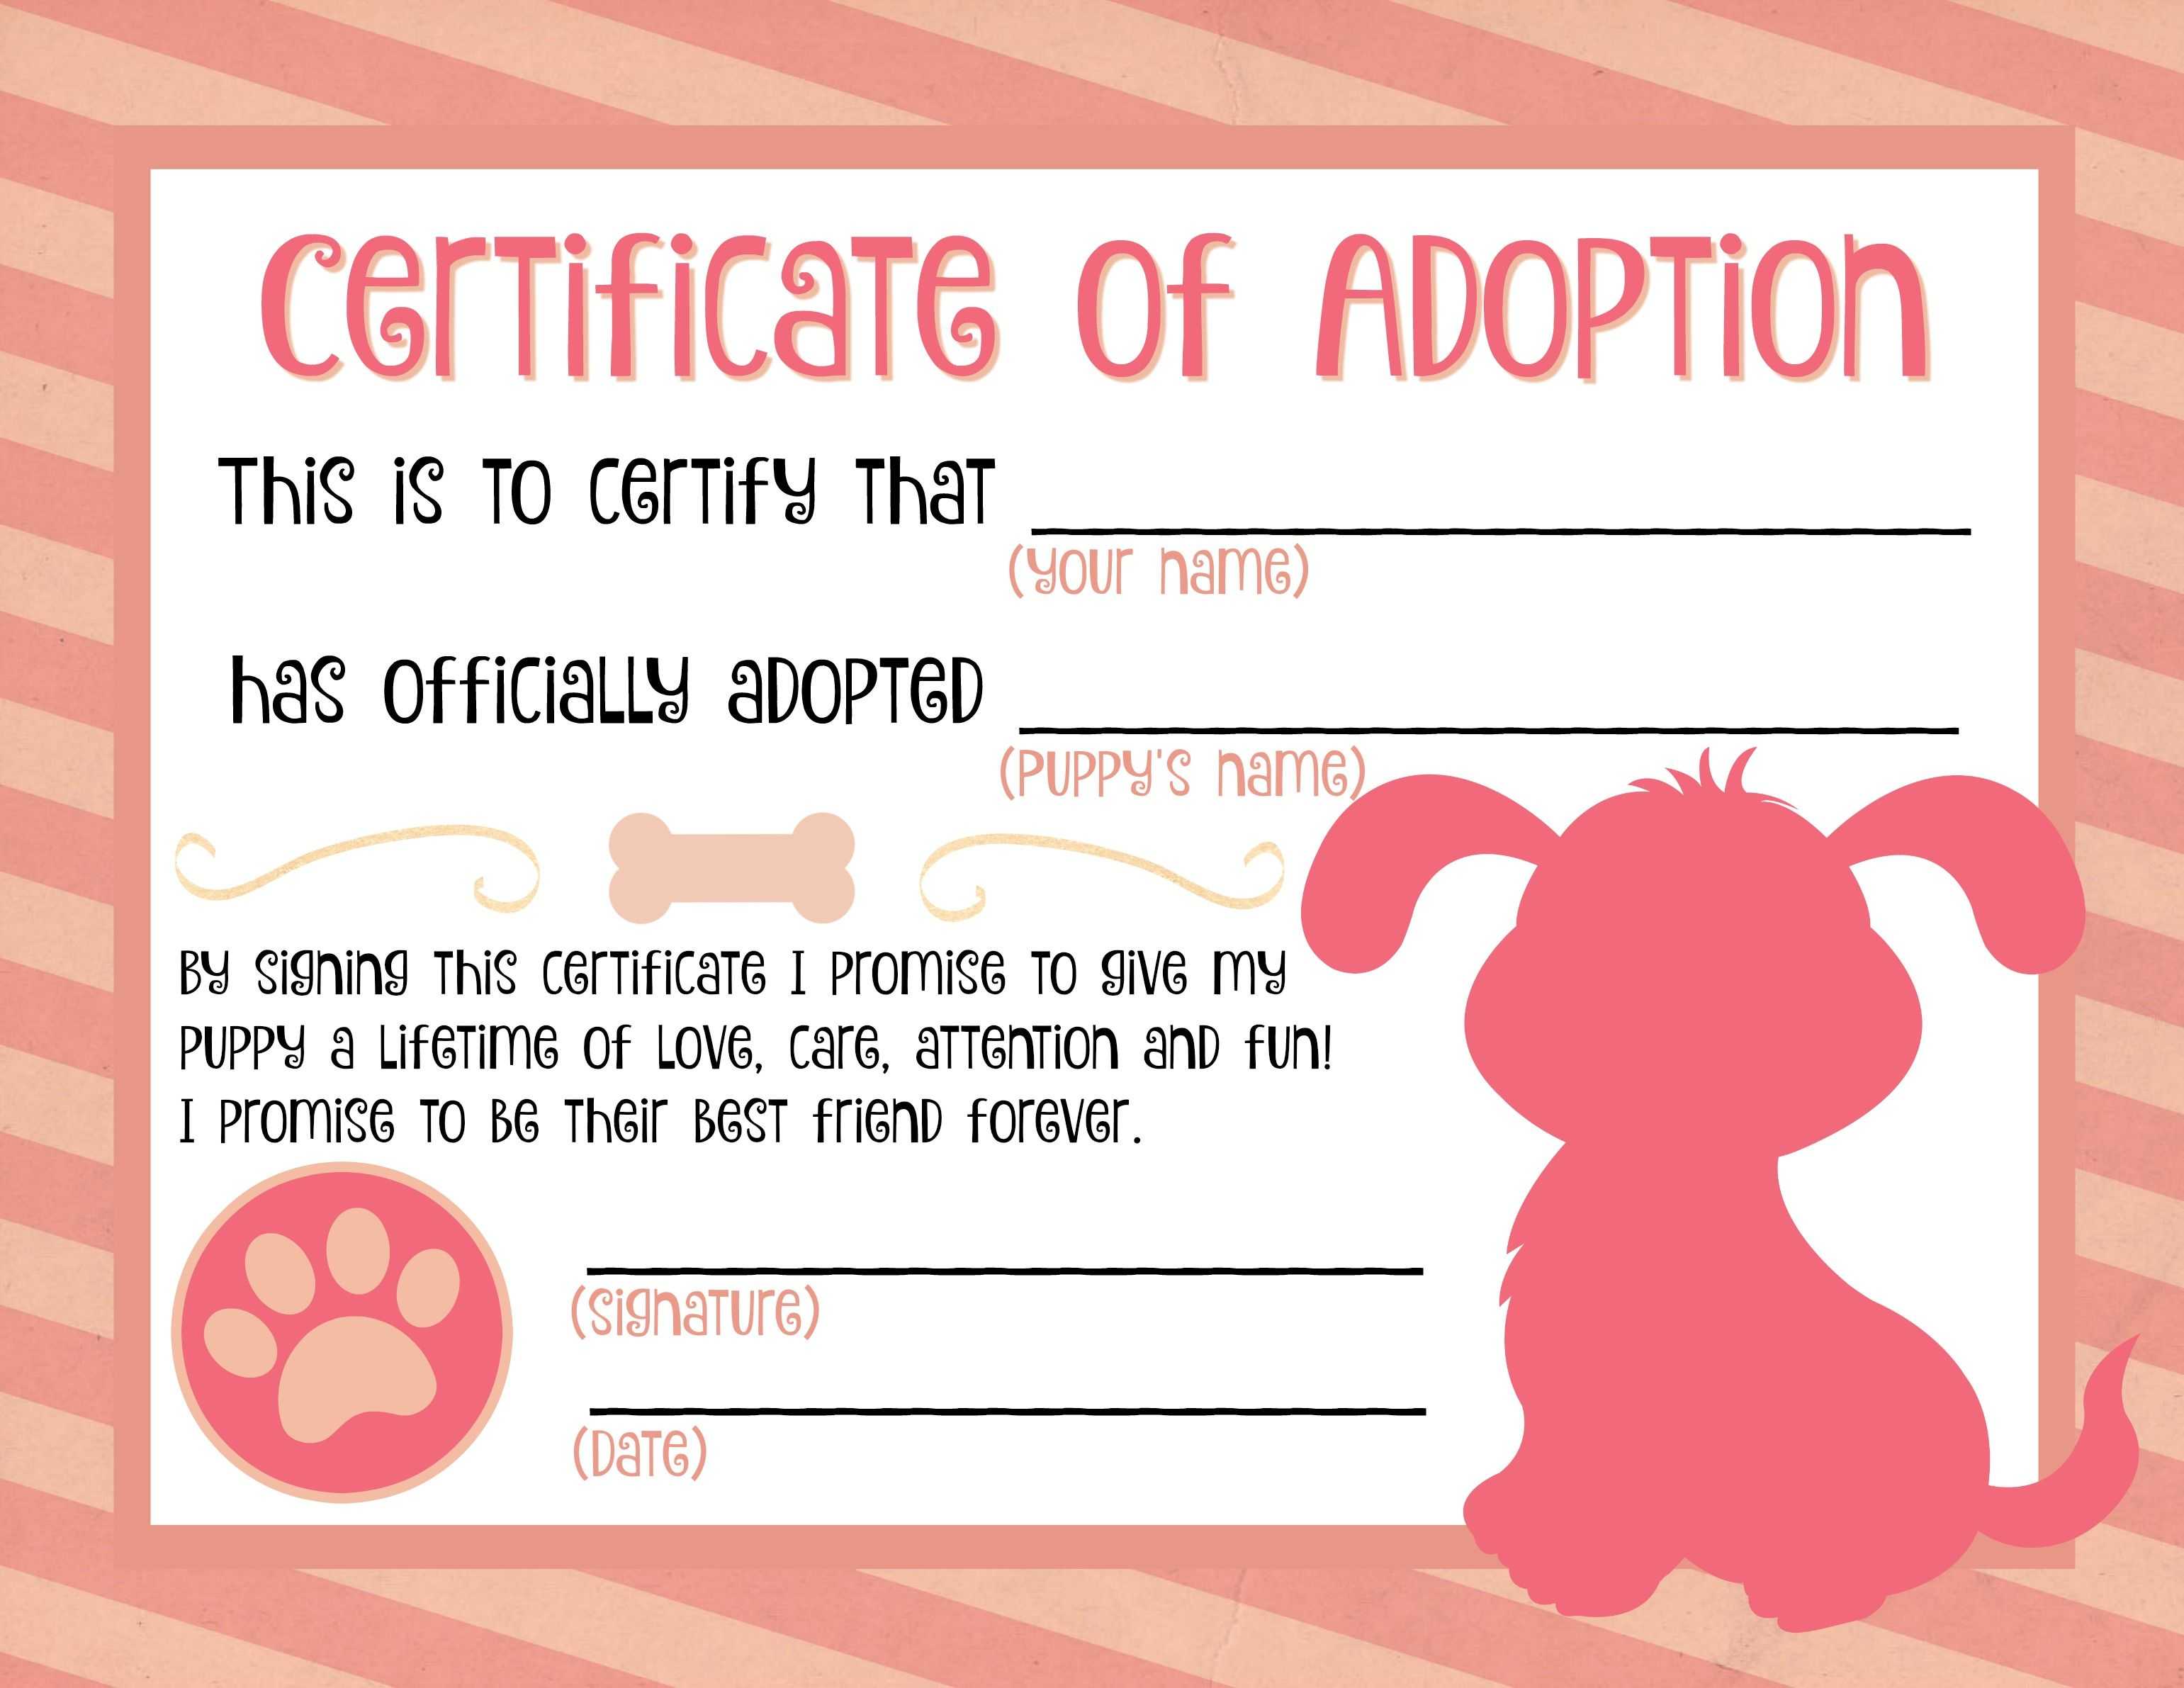 Puppy Adoption Certificate … | Party Ideas In 2019 | Puppy Regarding Pet Adoption Certificate Template